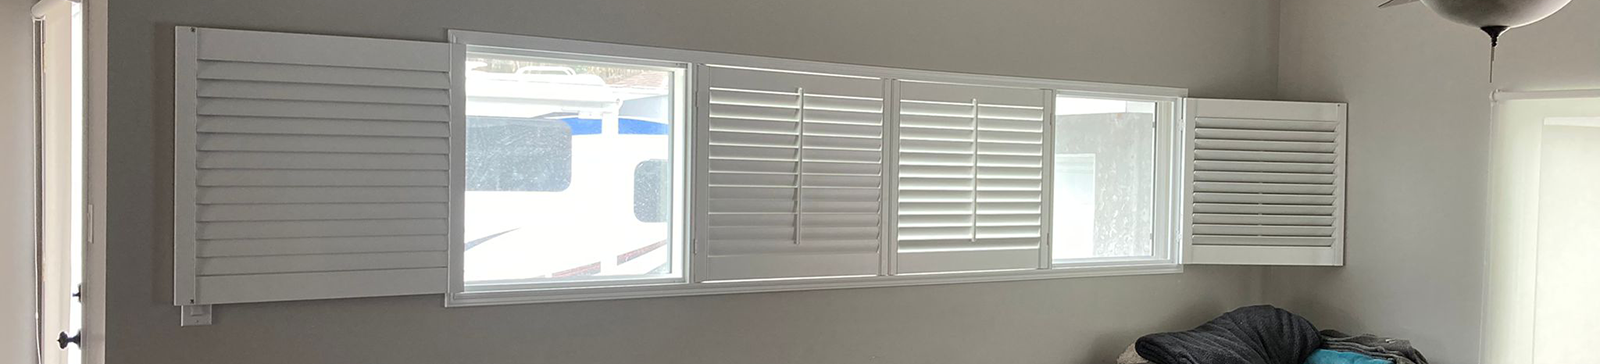 Tustin Foothills Family Room with Window Shutters